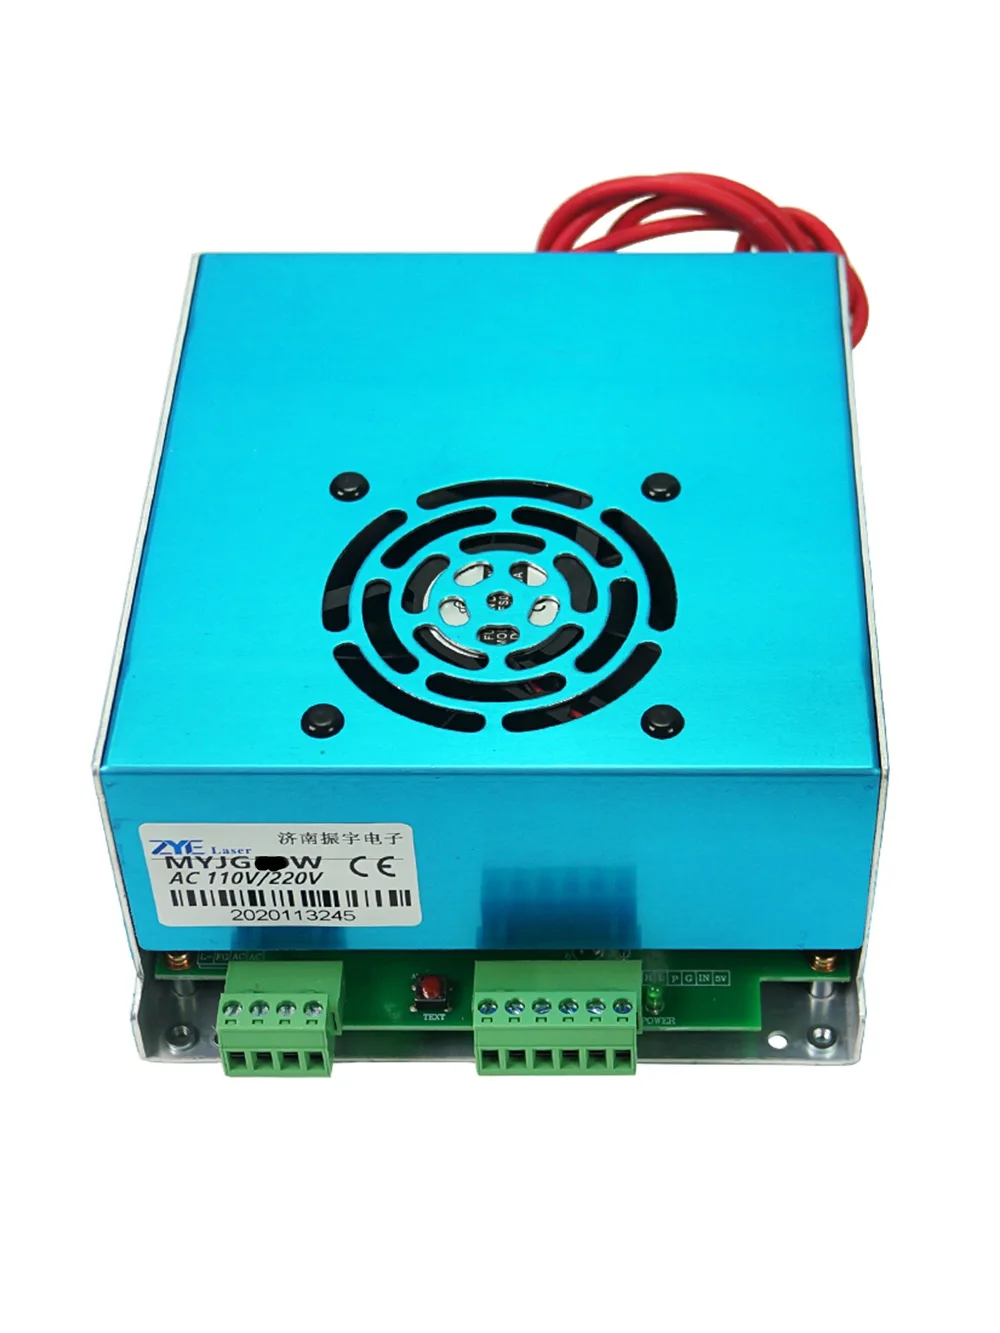 100w Power Supply for CO2 Laser Engraving Cutting Machine 110V compatible SALE 